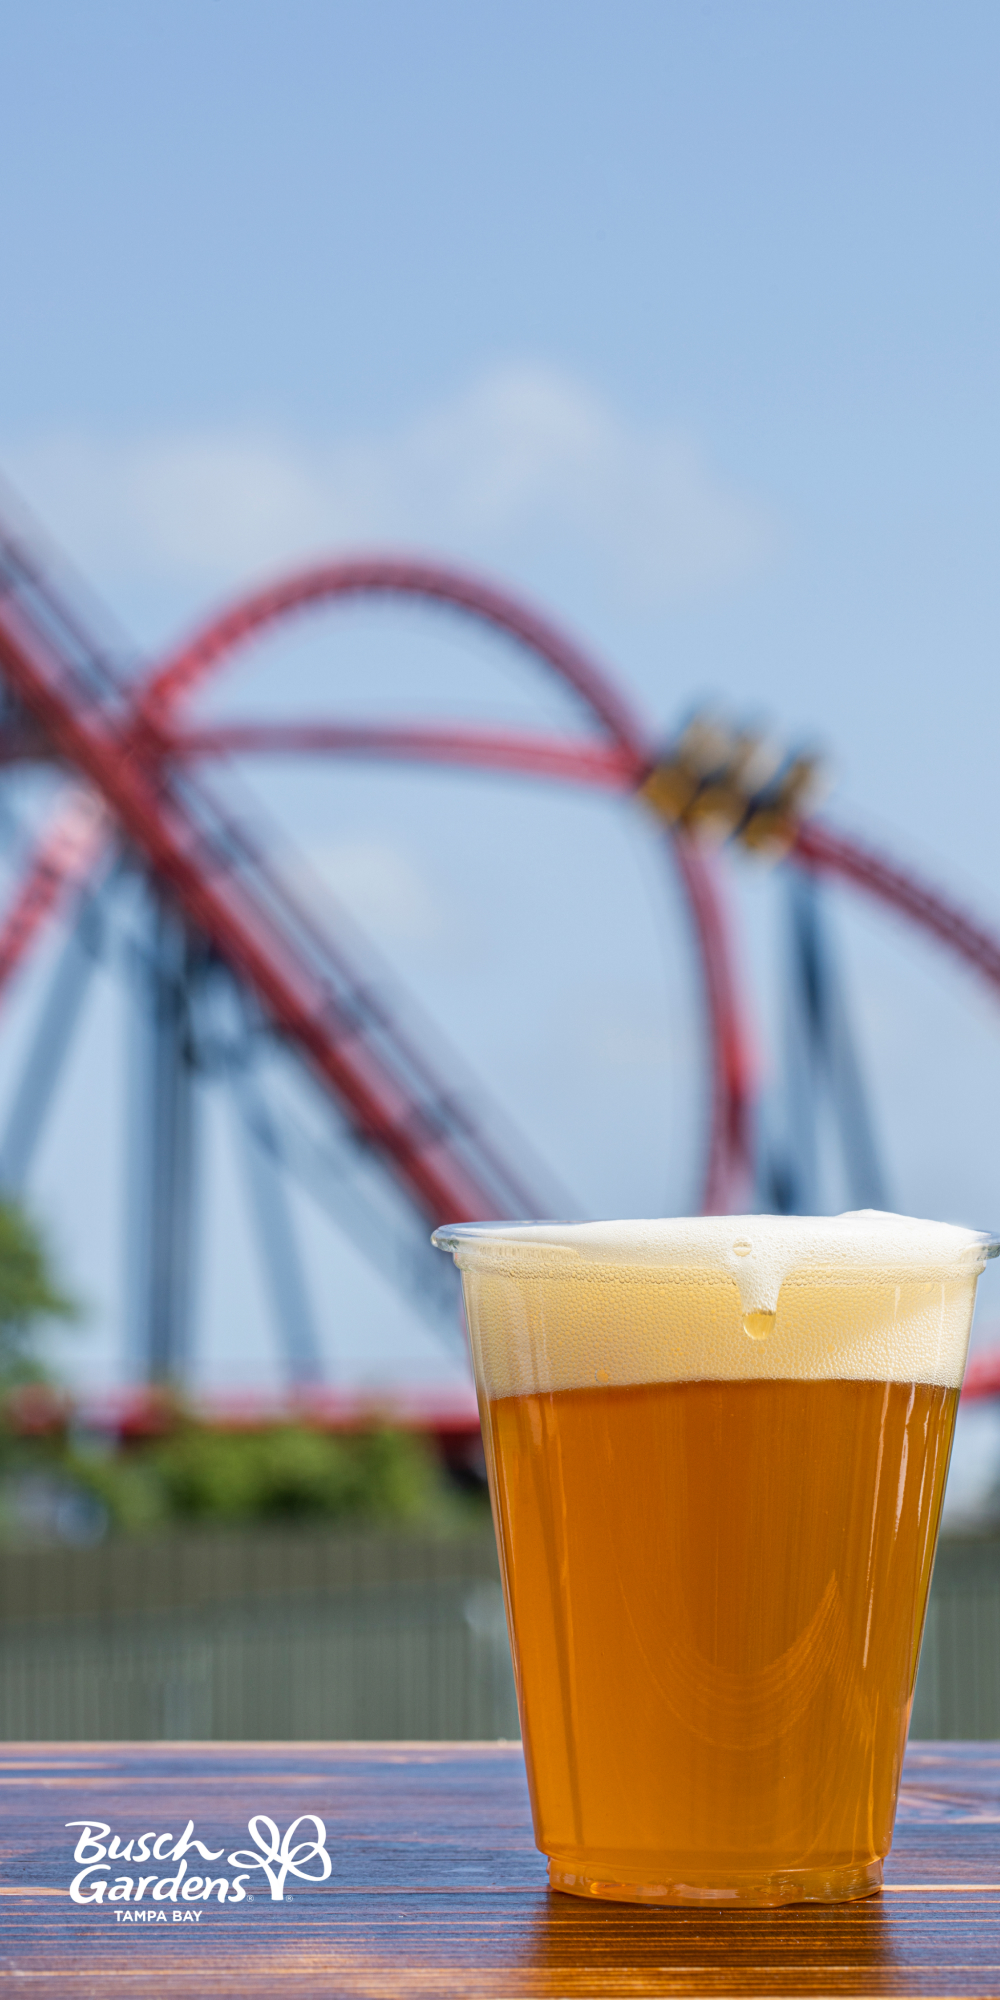 Beat the heat with a refreshing drink during Bier Fest at Busch Gardens Tampa Bay.